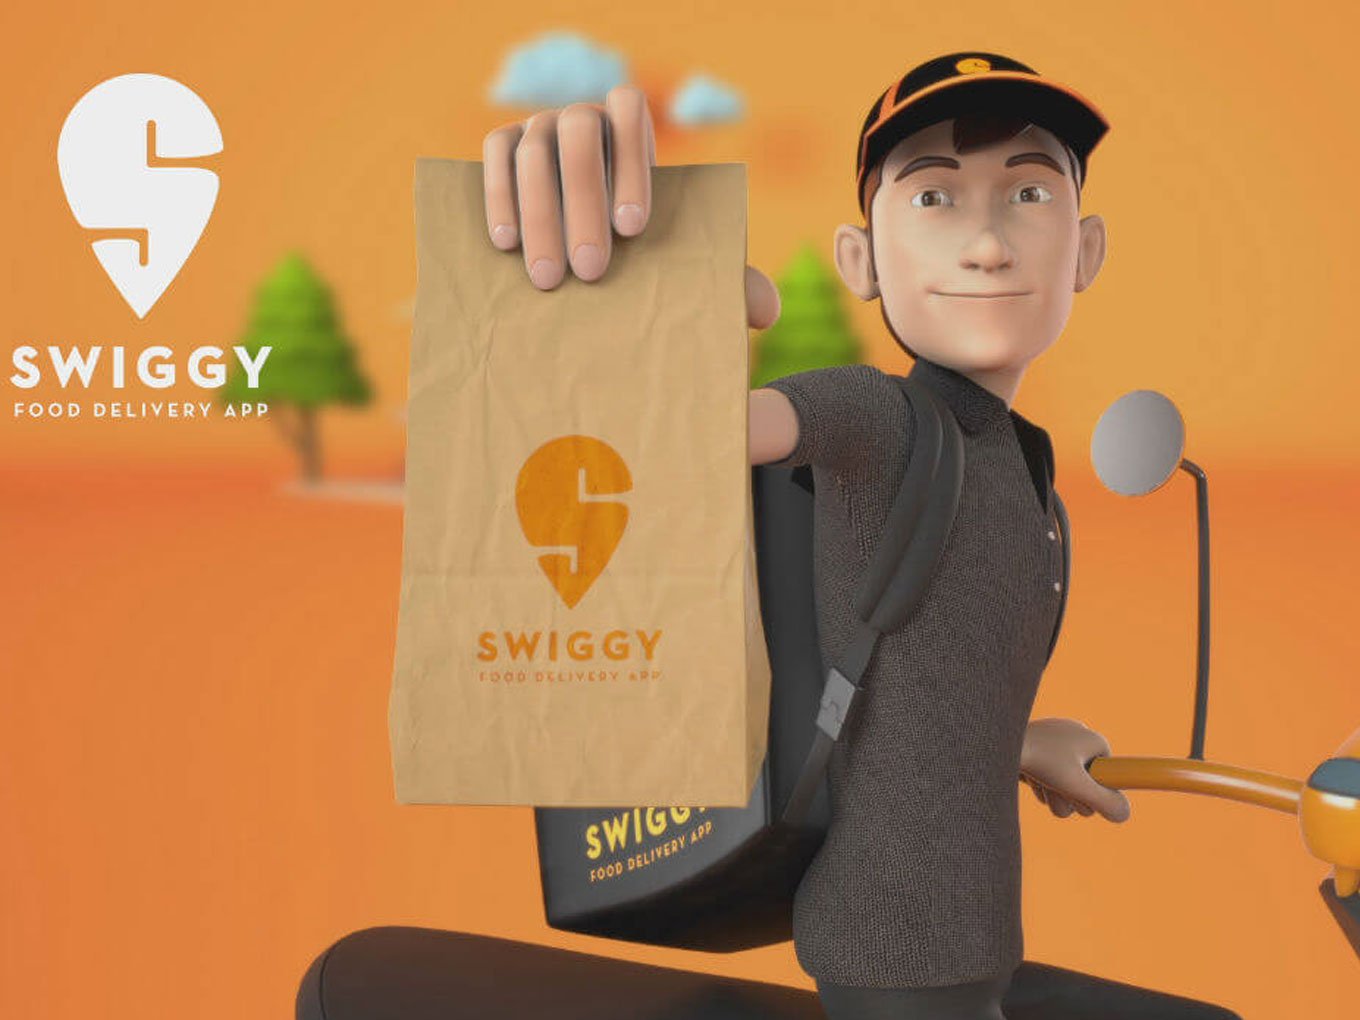 Food Delivery More Advanced In India Than US: Swiggy Investor Larry Illg